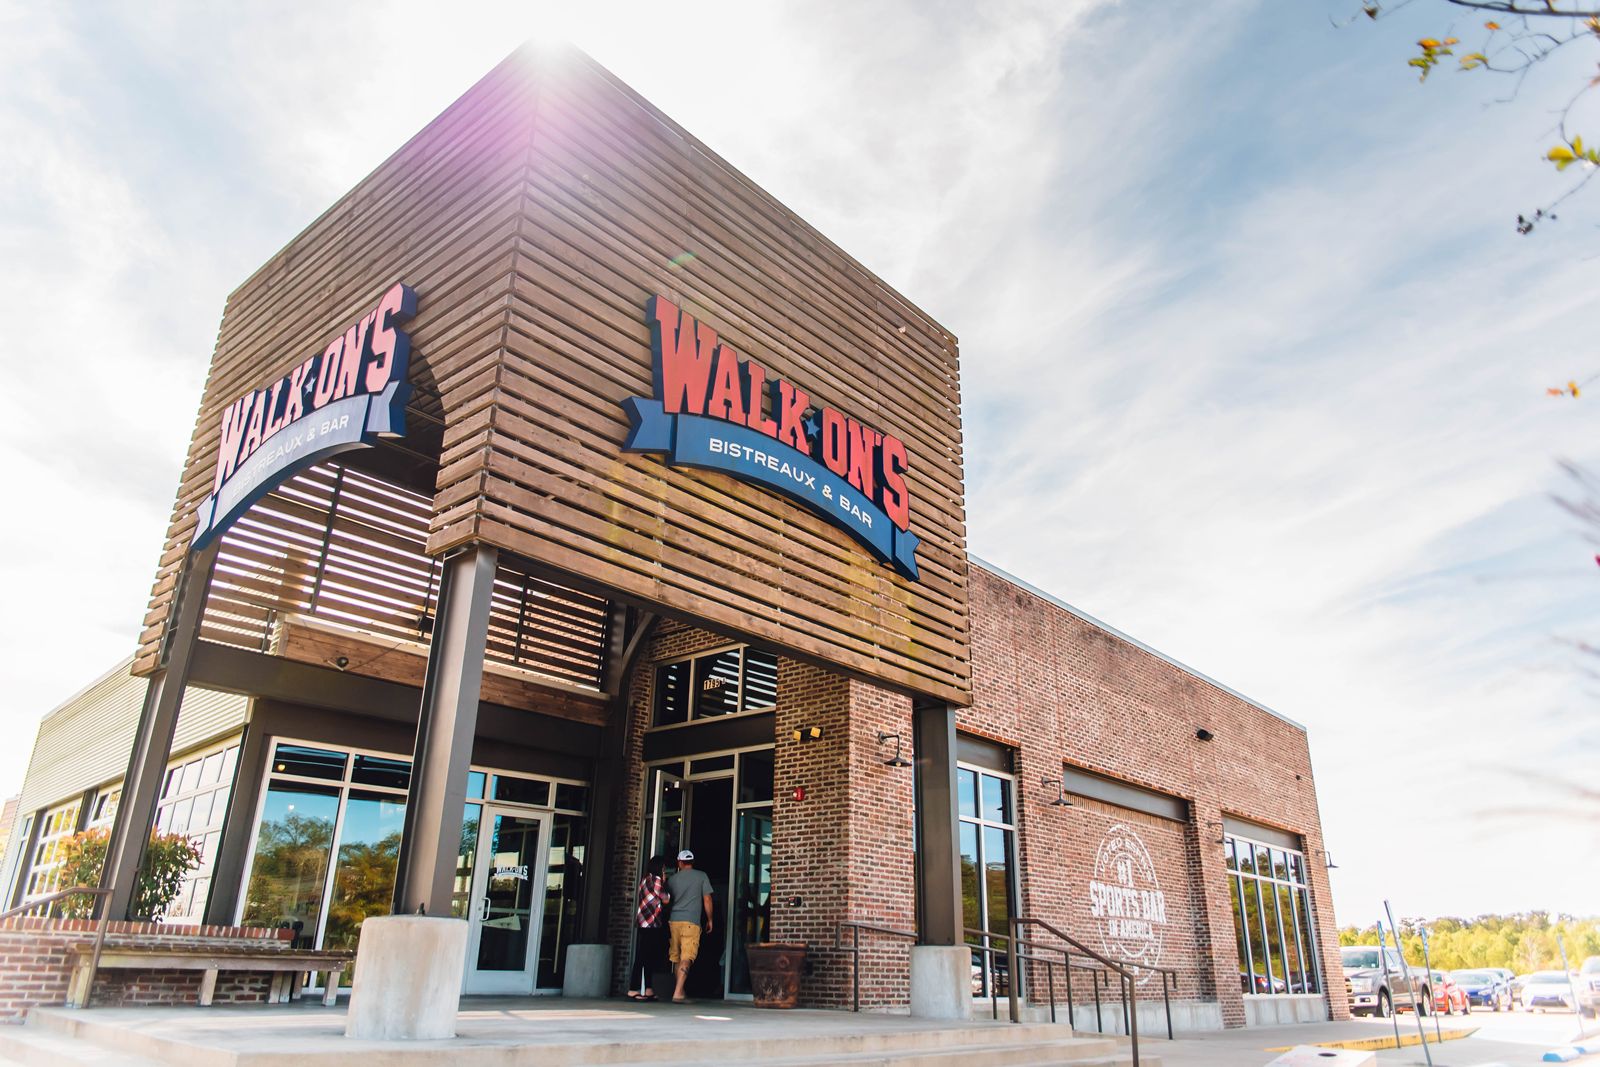 Walk-On's Celebrates Grand Opening of First Oxford Restaurant